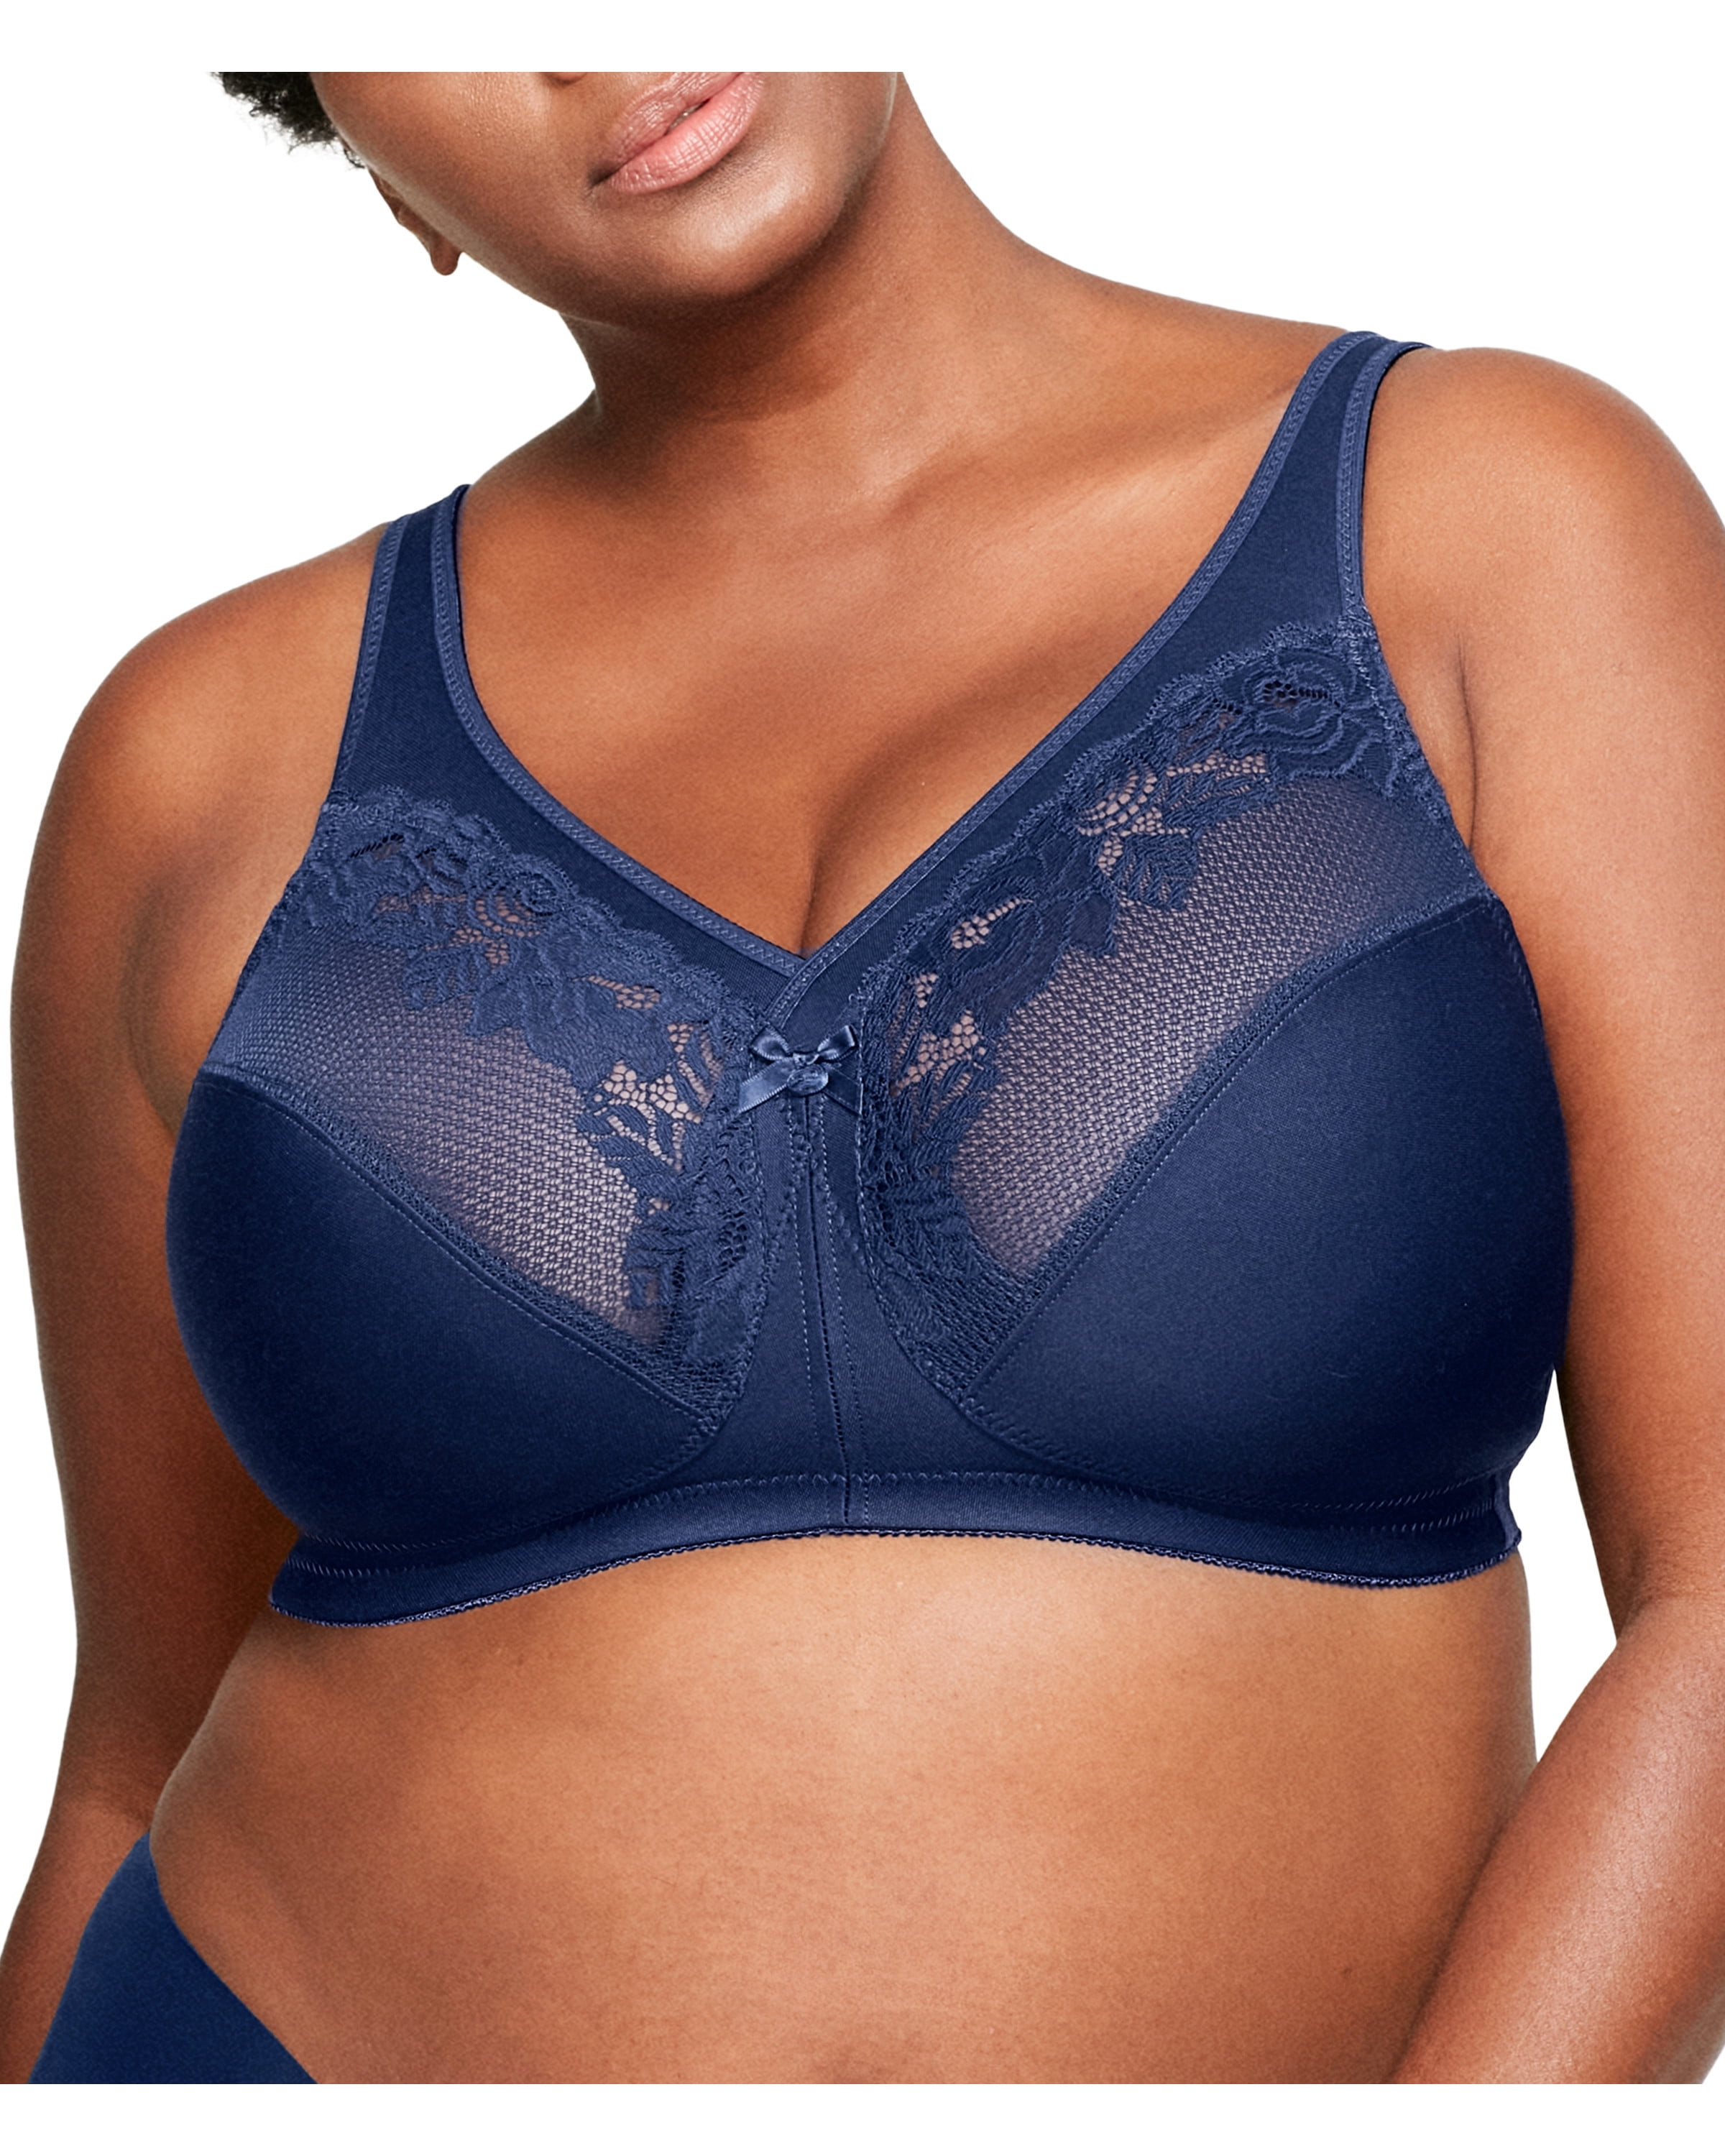 Playtex 18 Hour 4912 Undercover Slimming Wirefree Bra Cafe Au Lait 44D  Women's 